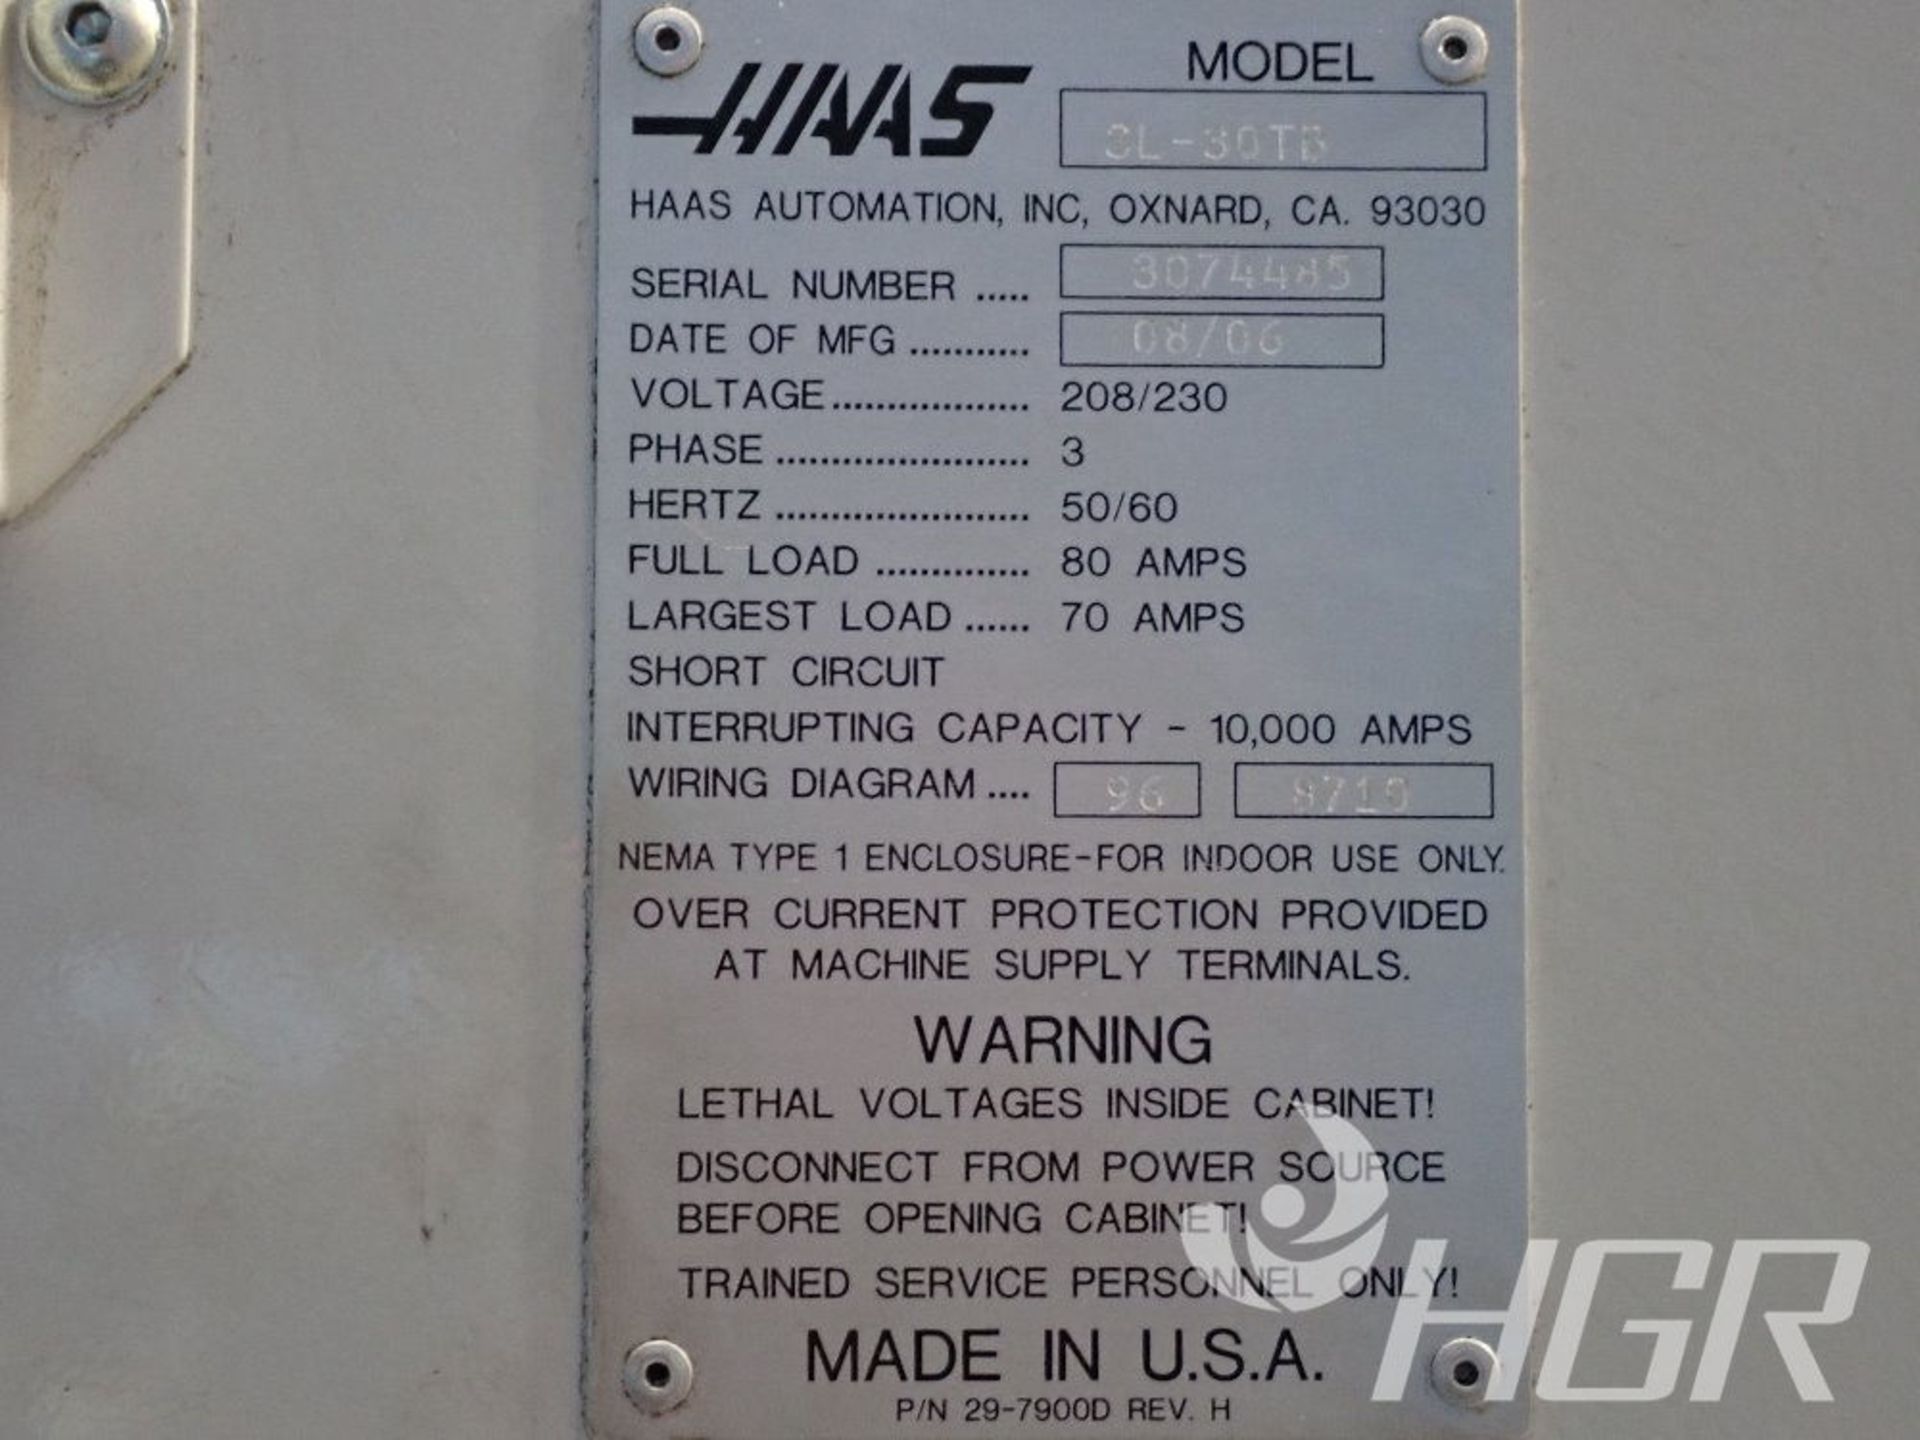 HAAS CNC LATHE, Model SL-30TB, Date: 2006; s/n 3074485, Approx. Capacity: n/a, Power: 3/50/60/208/ - Image 25 of 33